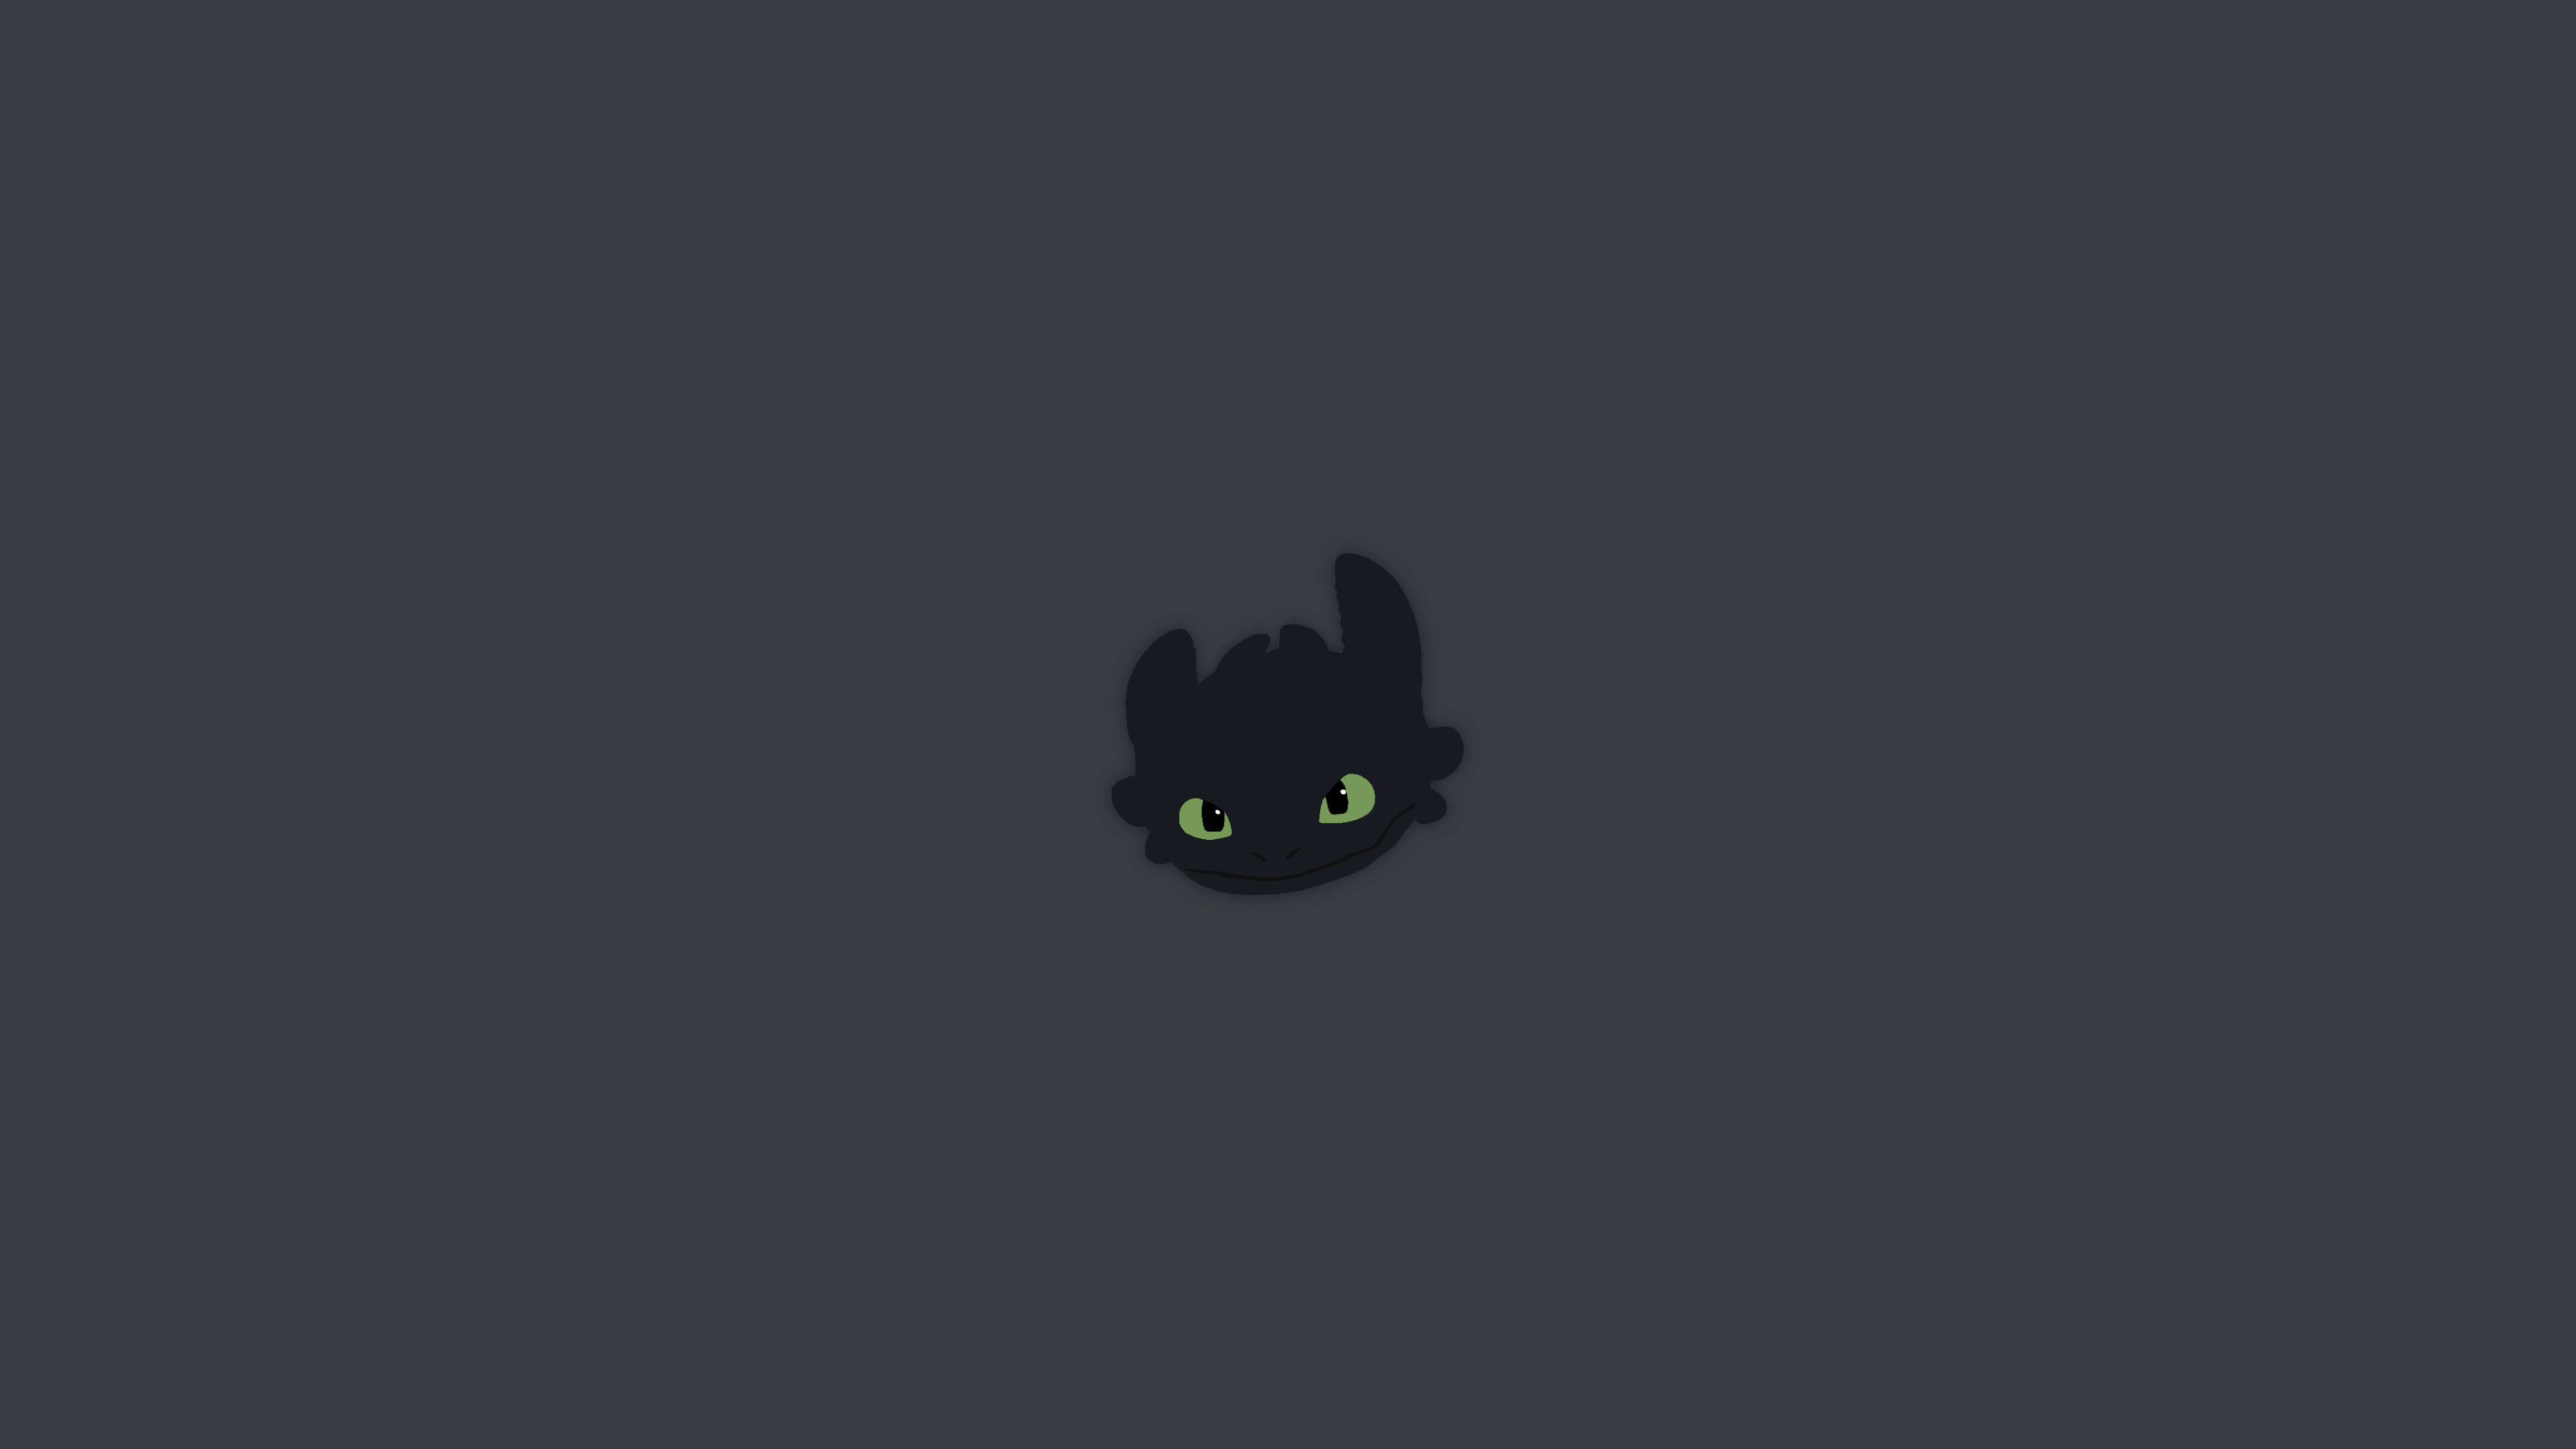 I made a simple 4K Wallpaper of Toothless